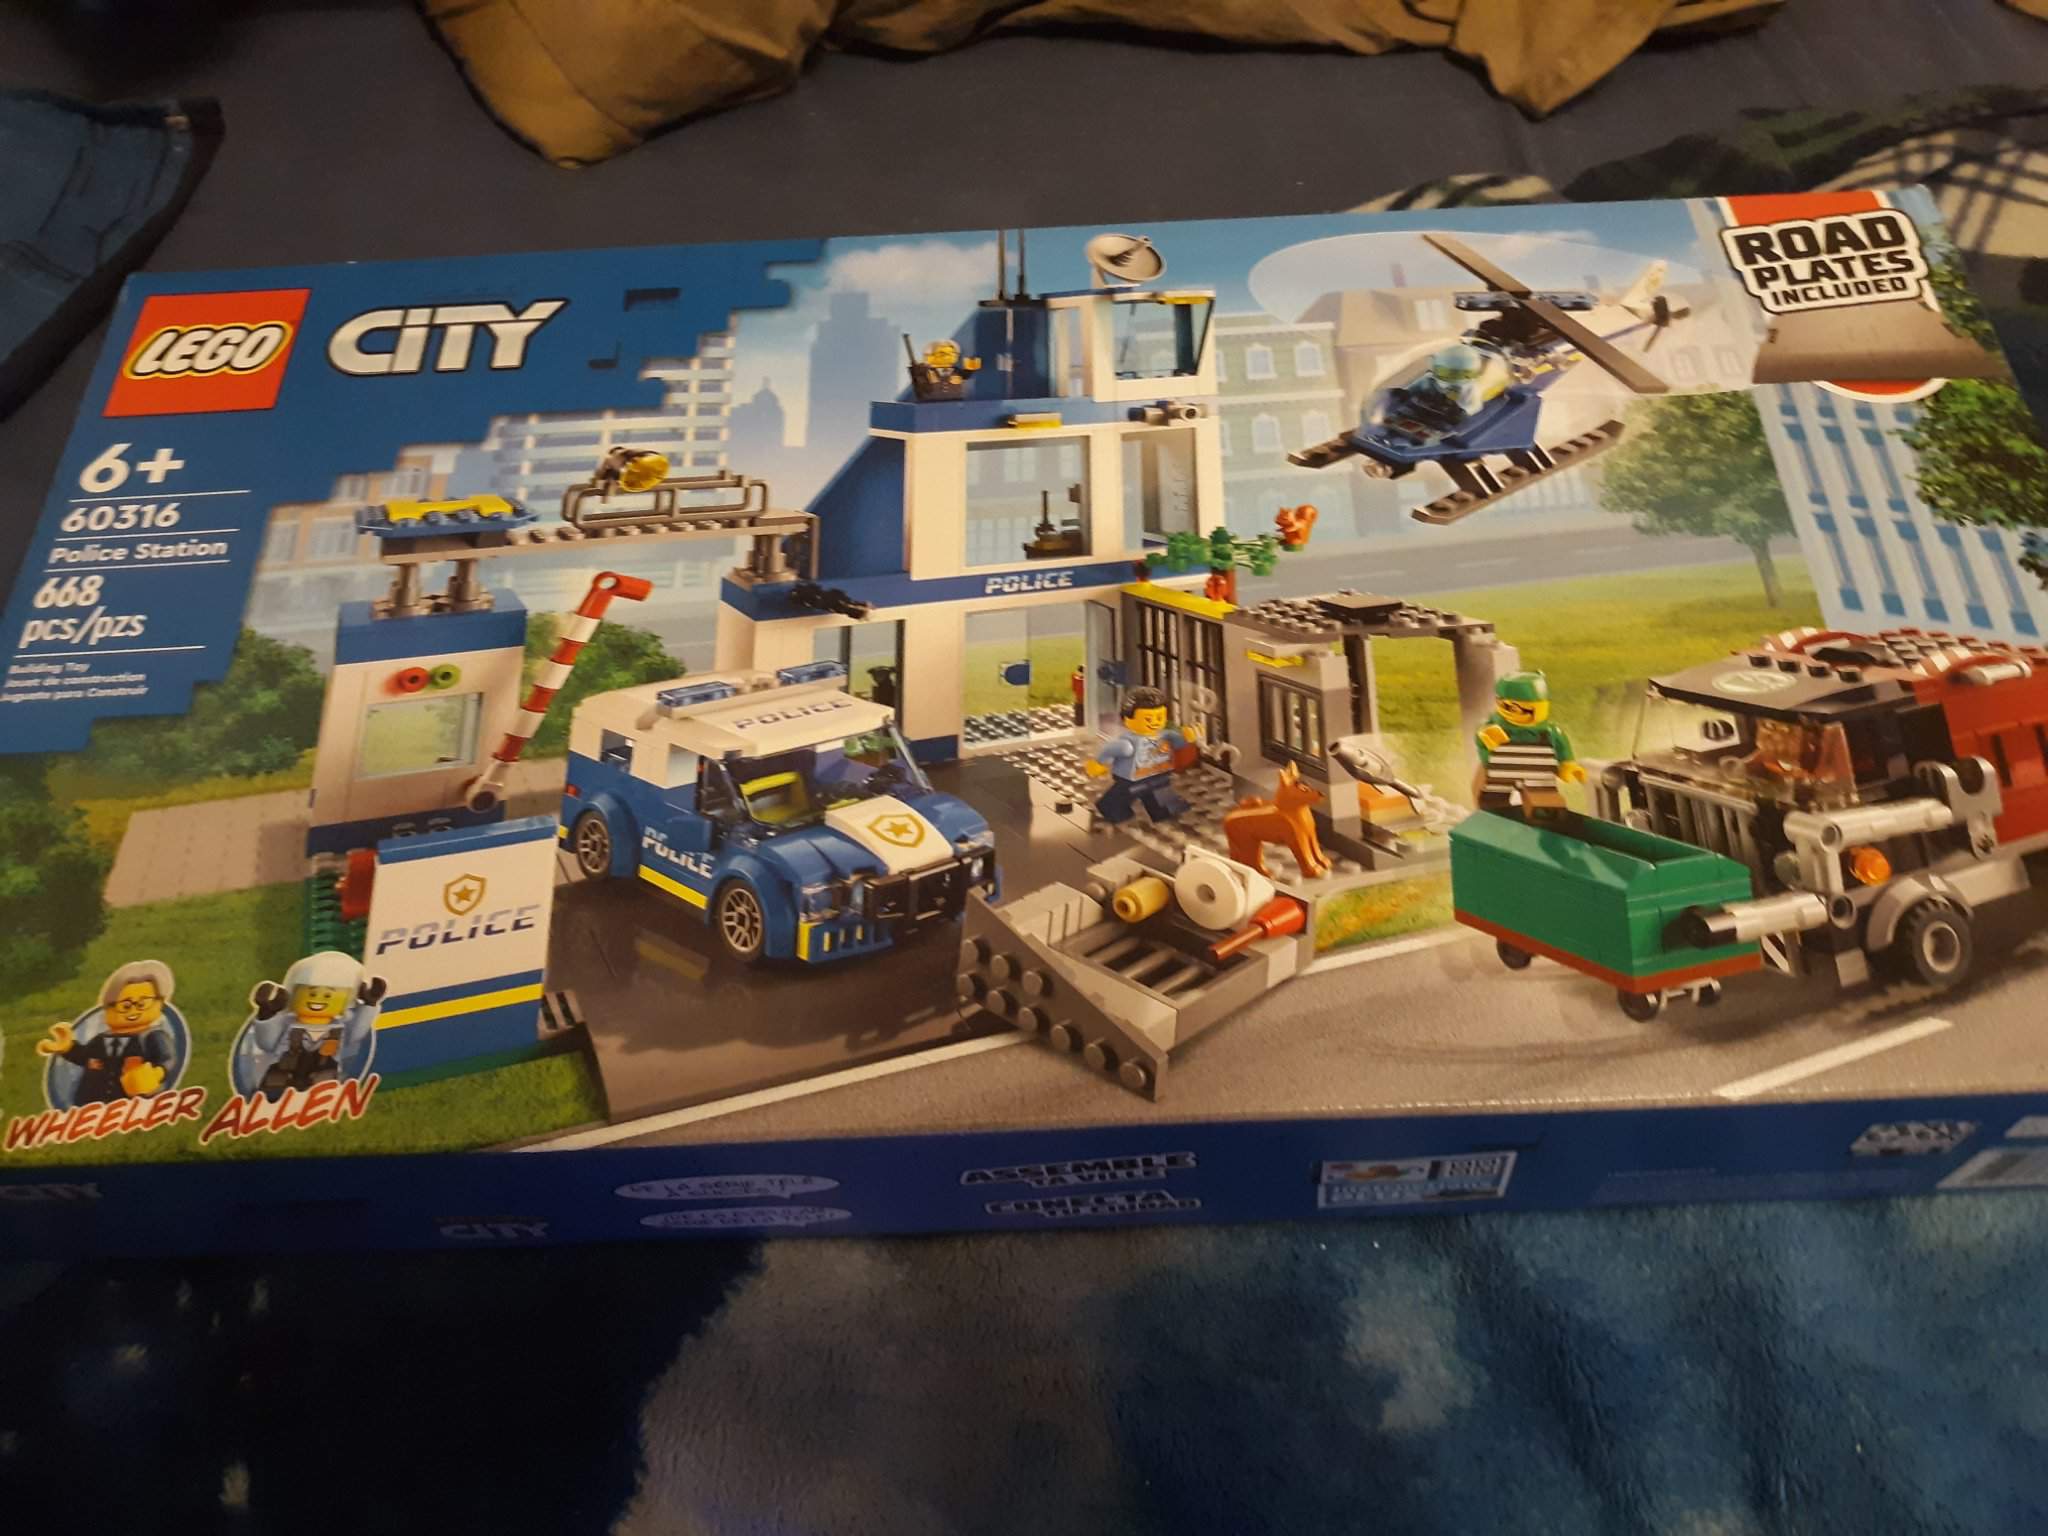 LEGO City Police Station Truck Toy & Helicopter Set 60316 